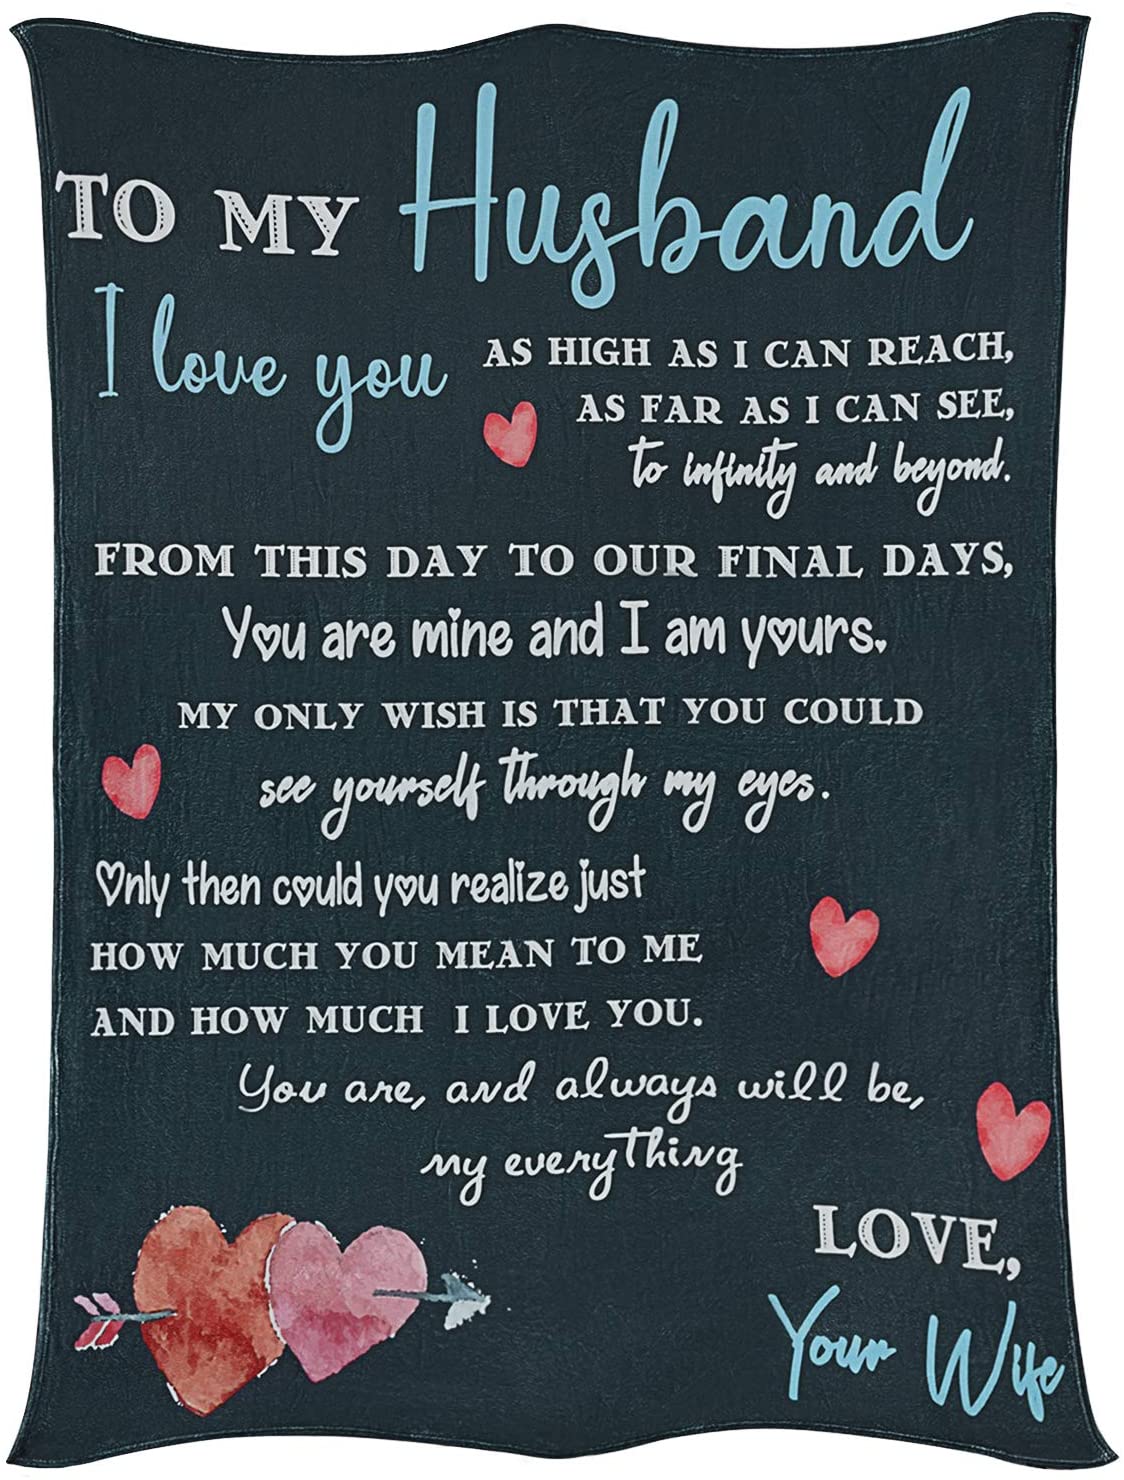 To My Husband Blanket From Wife, Gifts For Husband From Wife, Best Gifts Ideas For Husband, I Love You Blanket Gift for Husband From Wife, Hearts Blanket for Husband, Blanket For Couple Anniversary